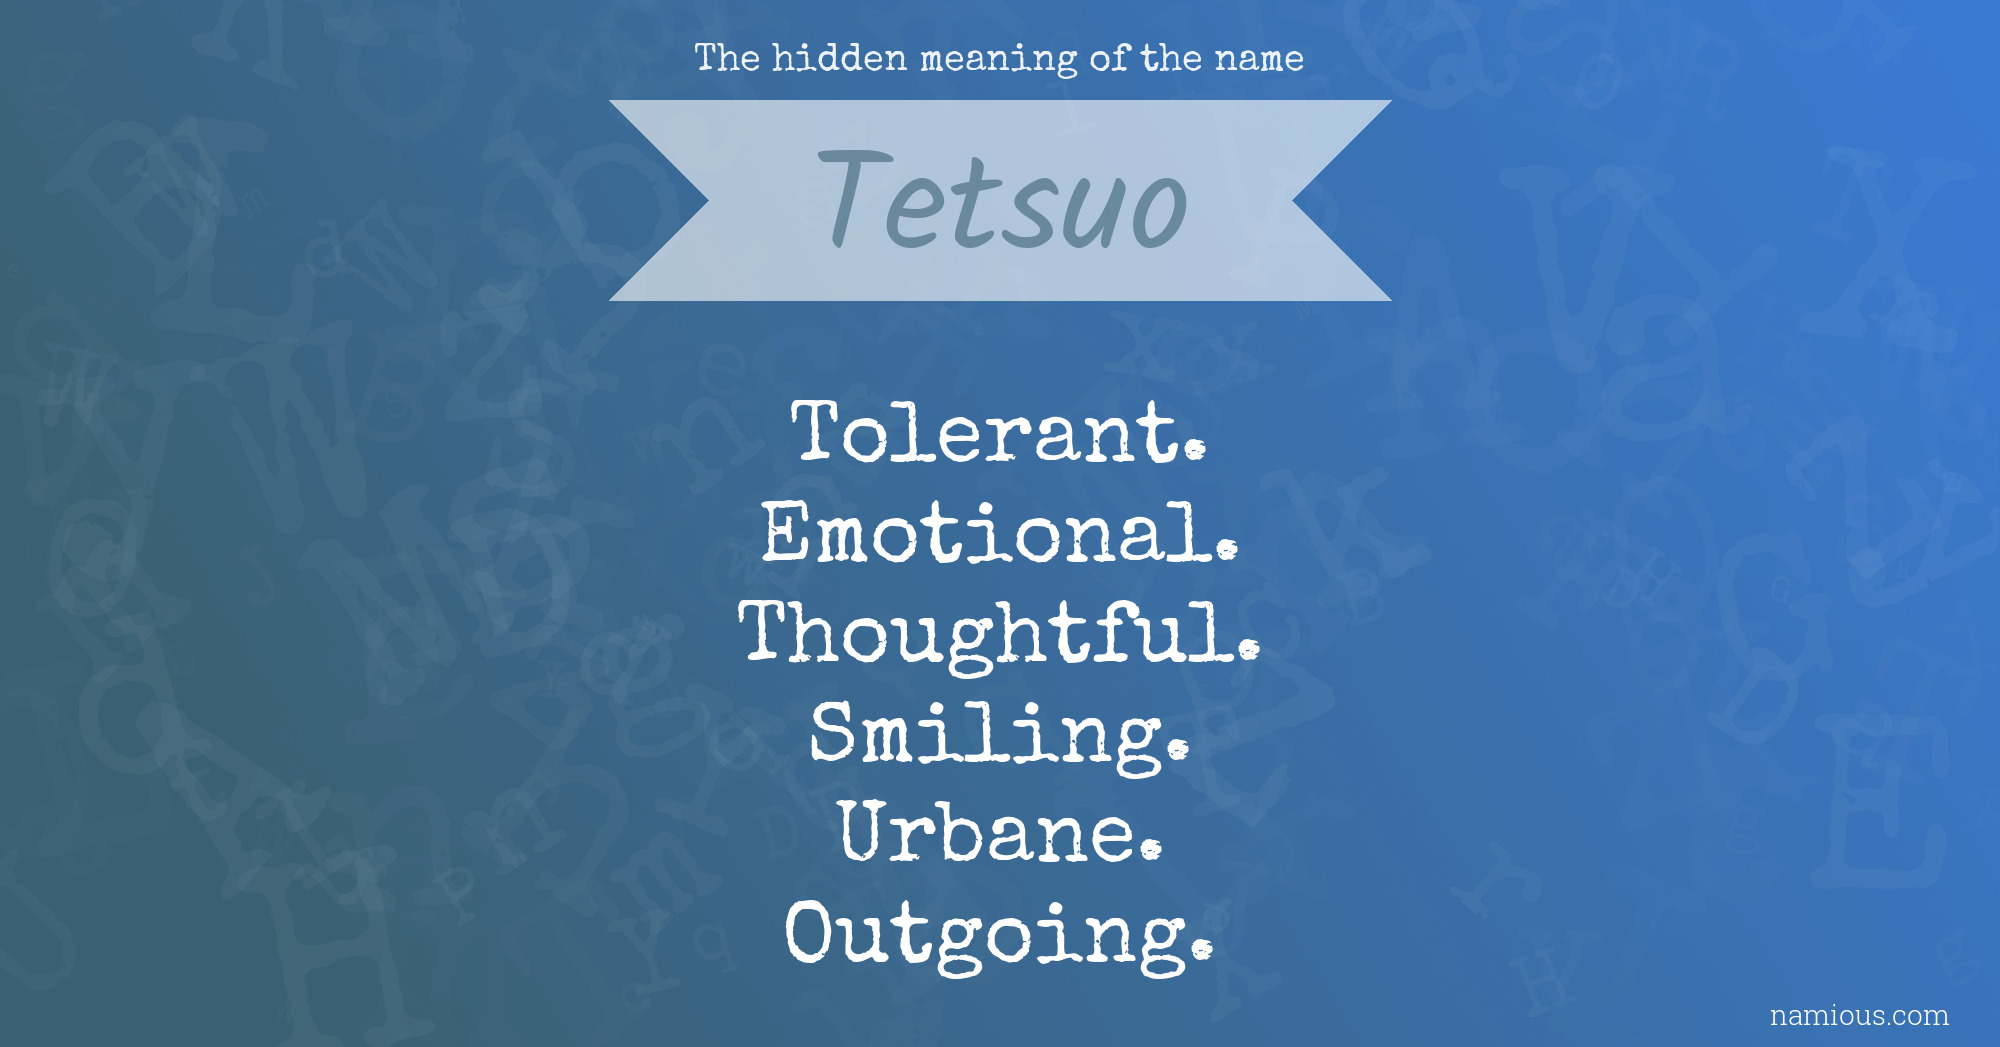 The hidden meaning of the name Tetsuo